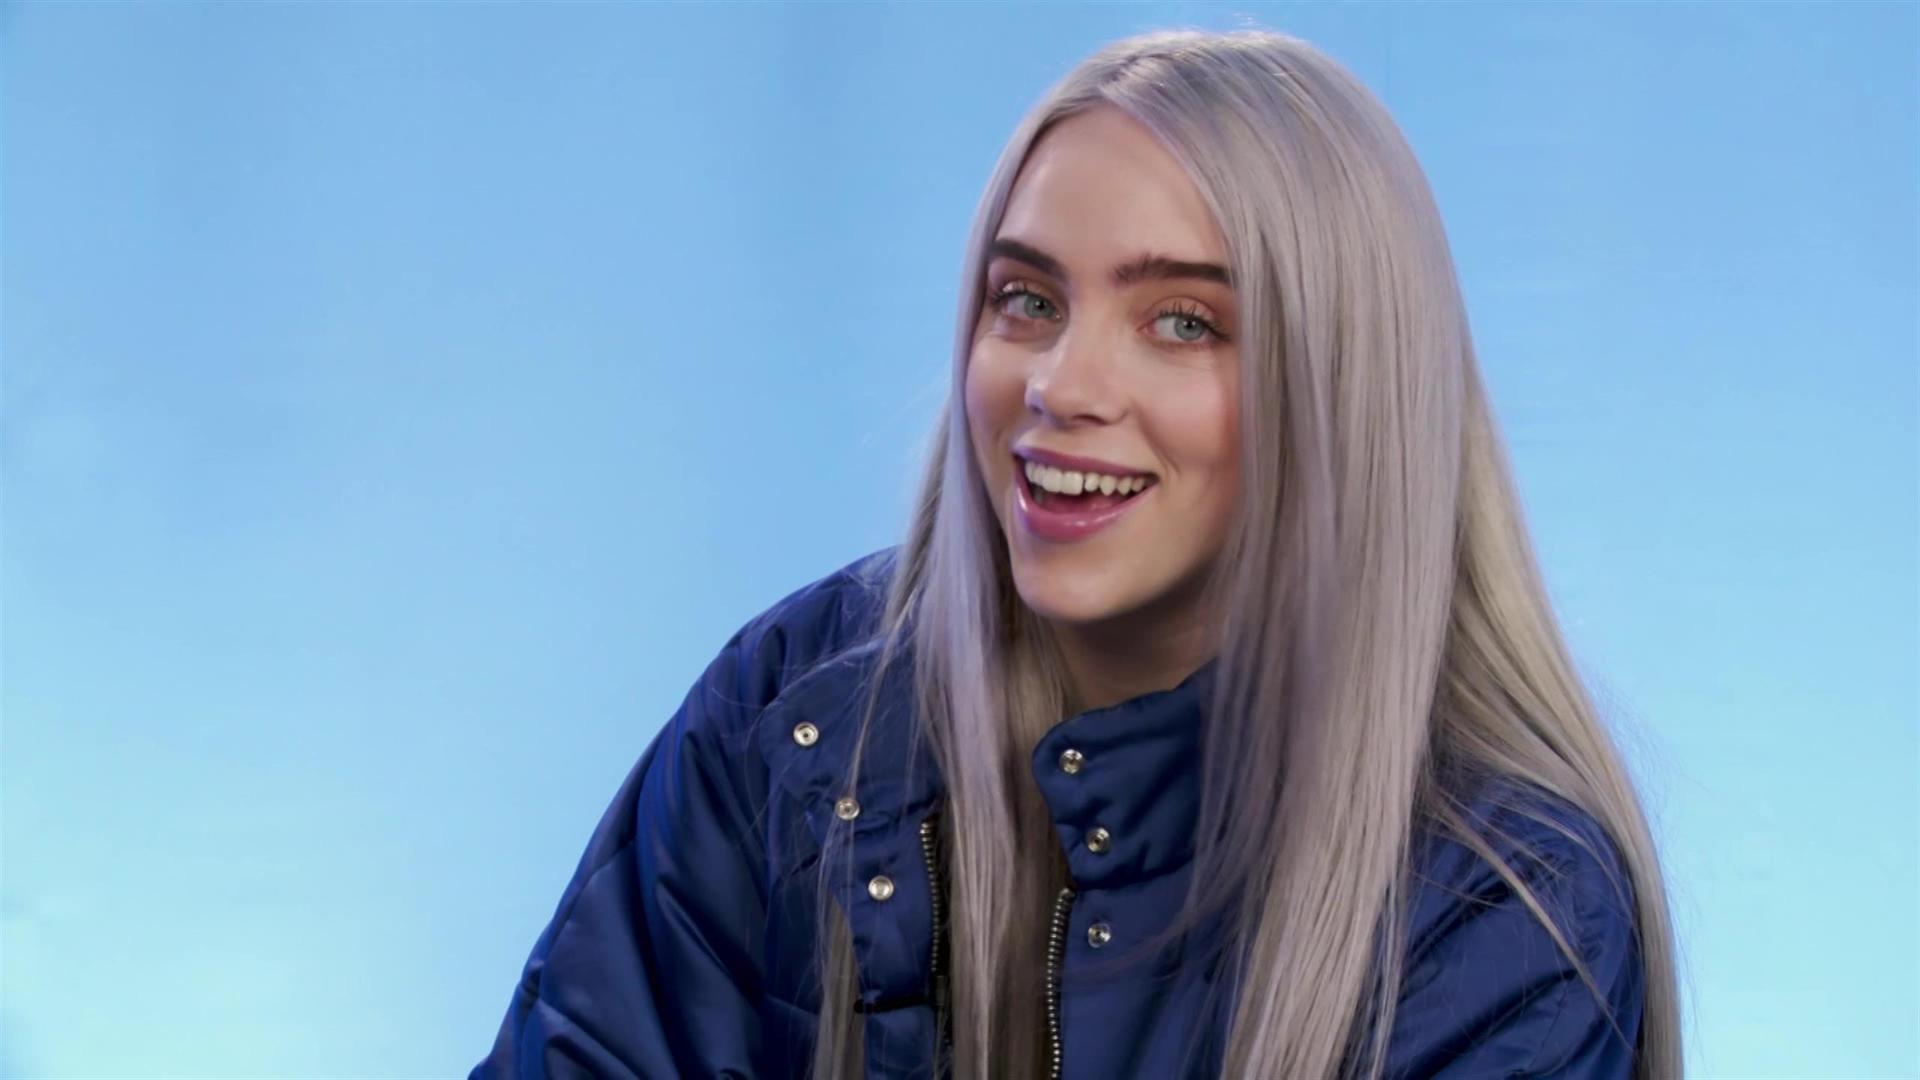 OMG billie with blue hair and then billieeilish 1920x1080